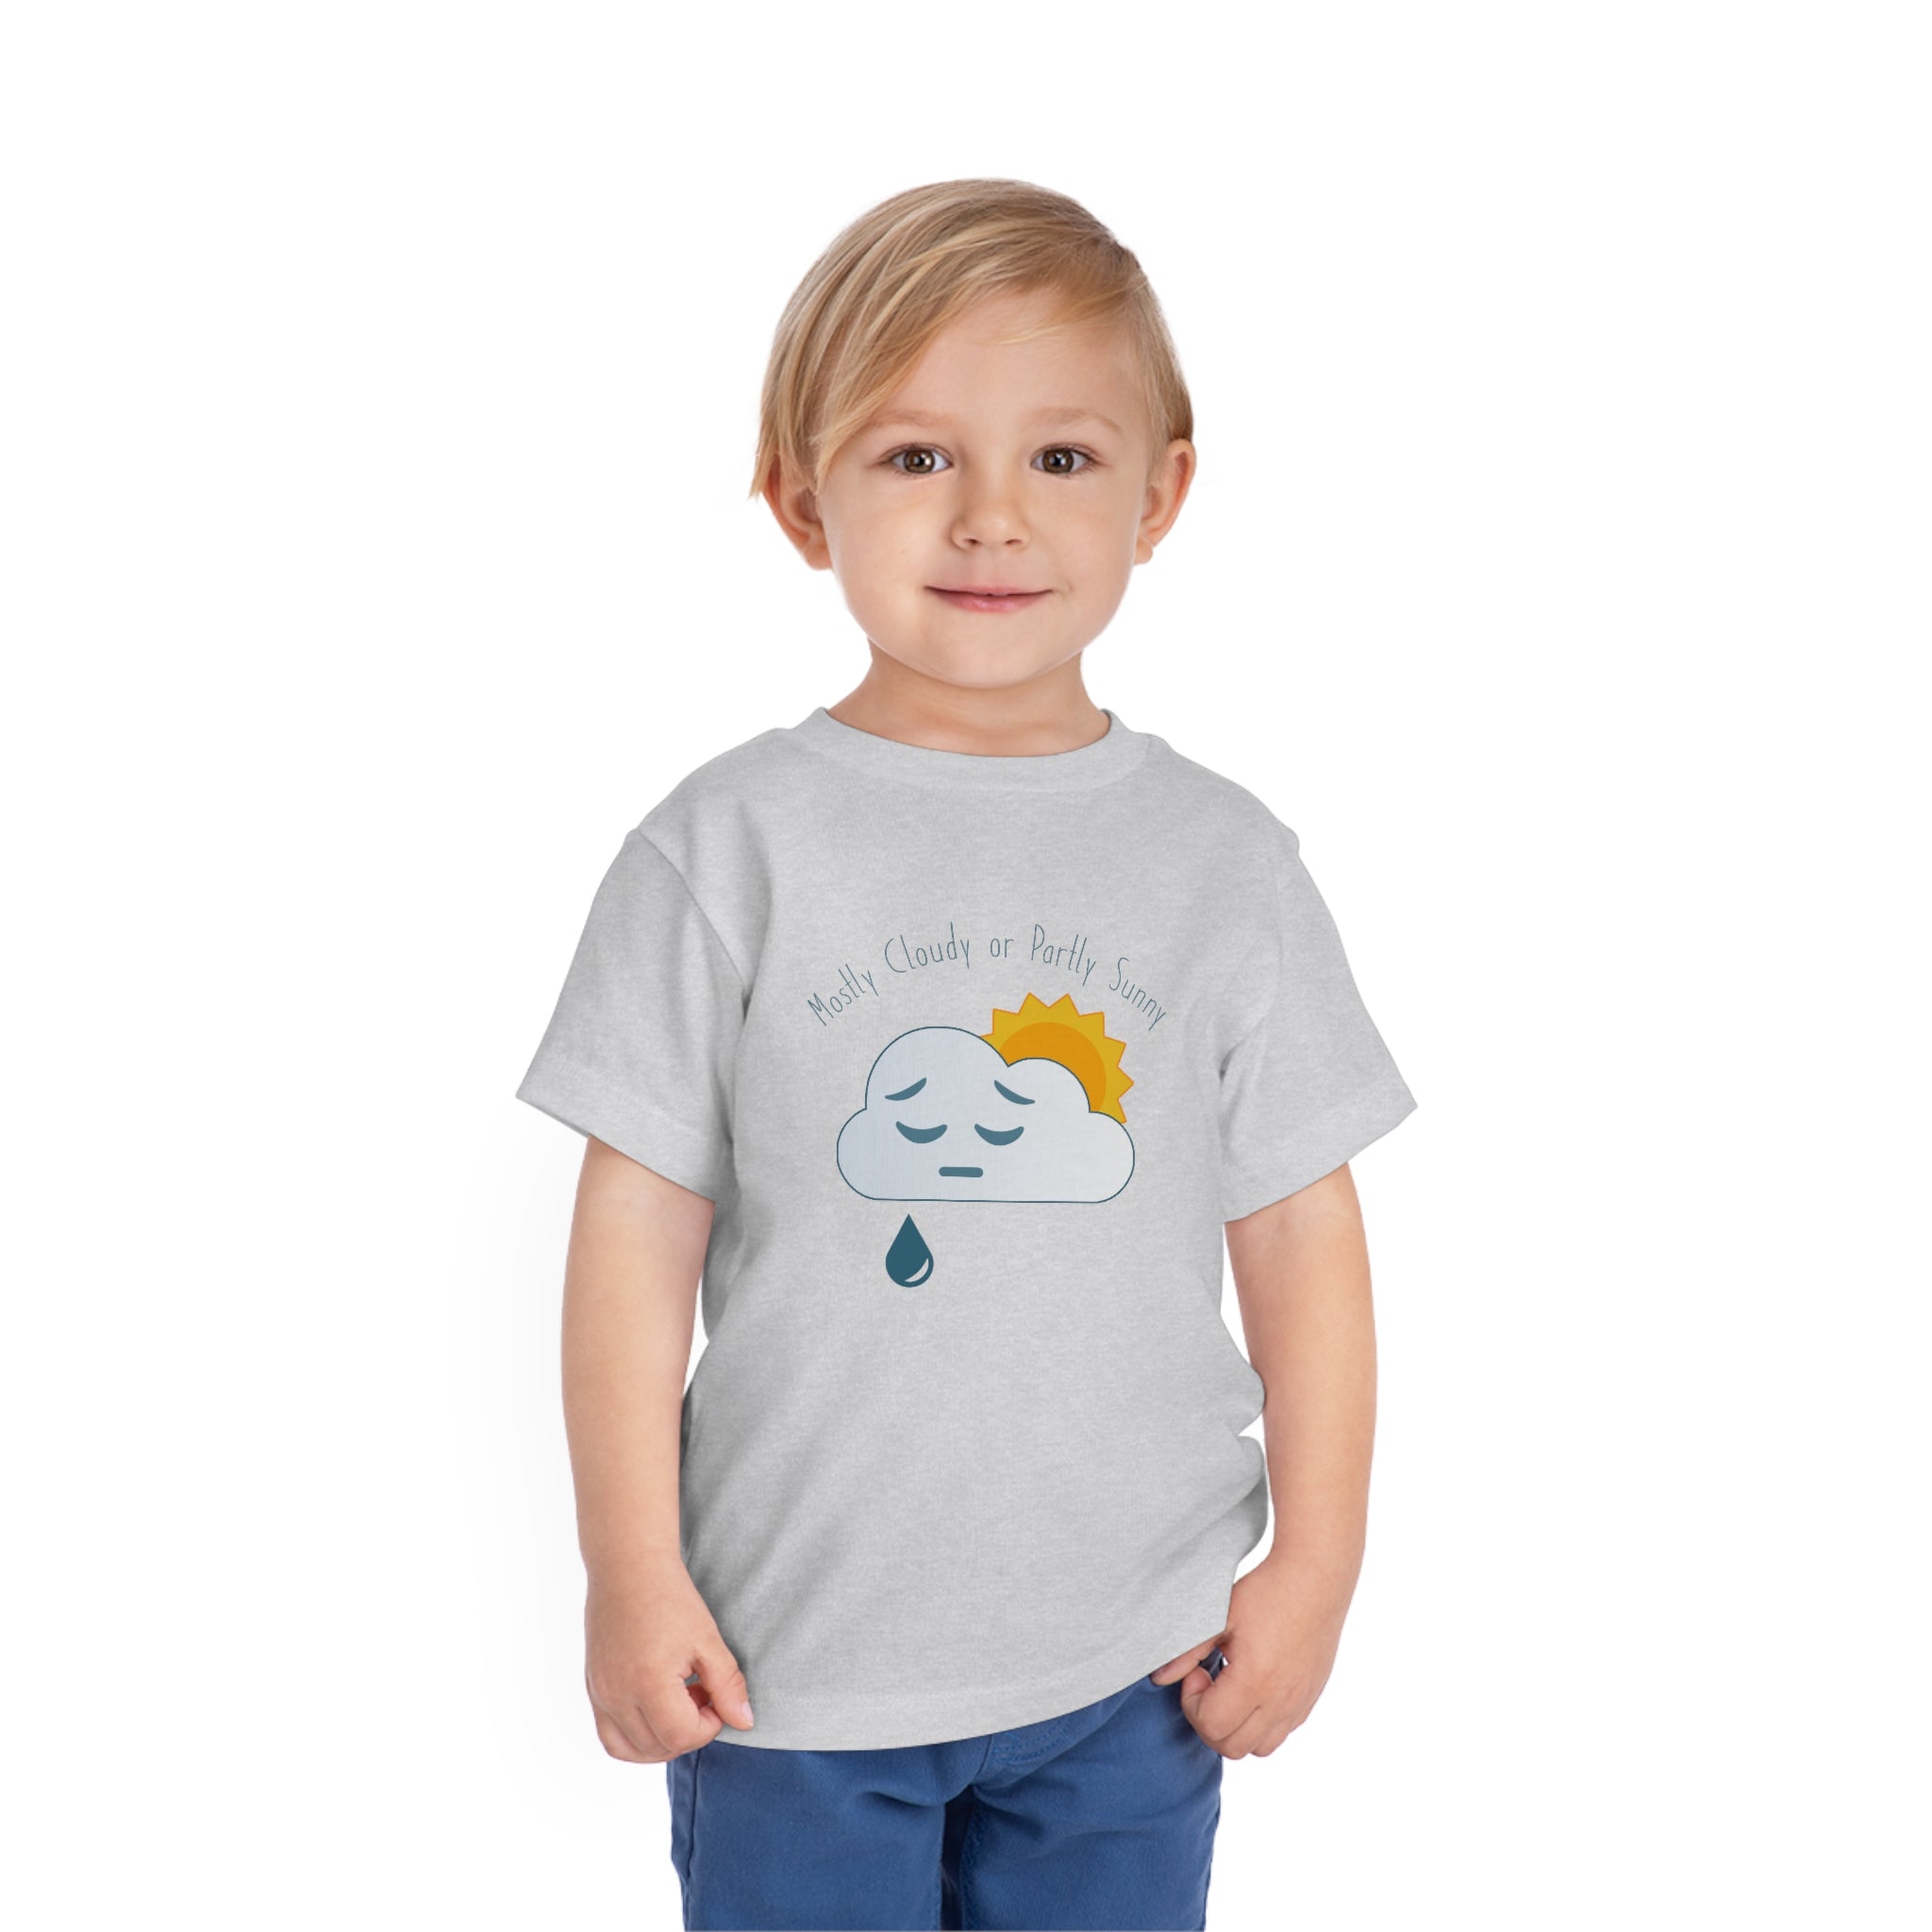 Mostly Cloudy Toddler Tee 